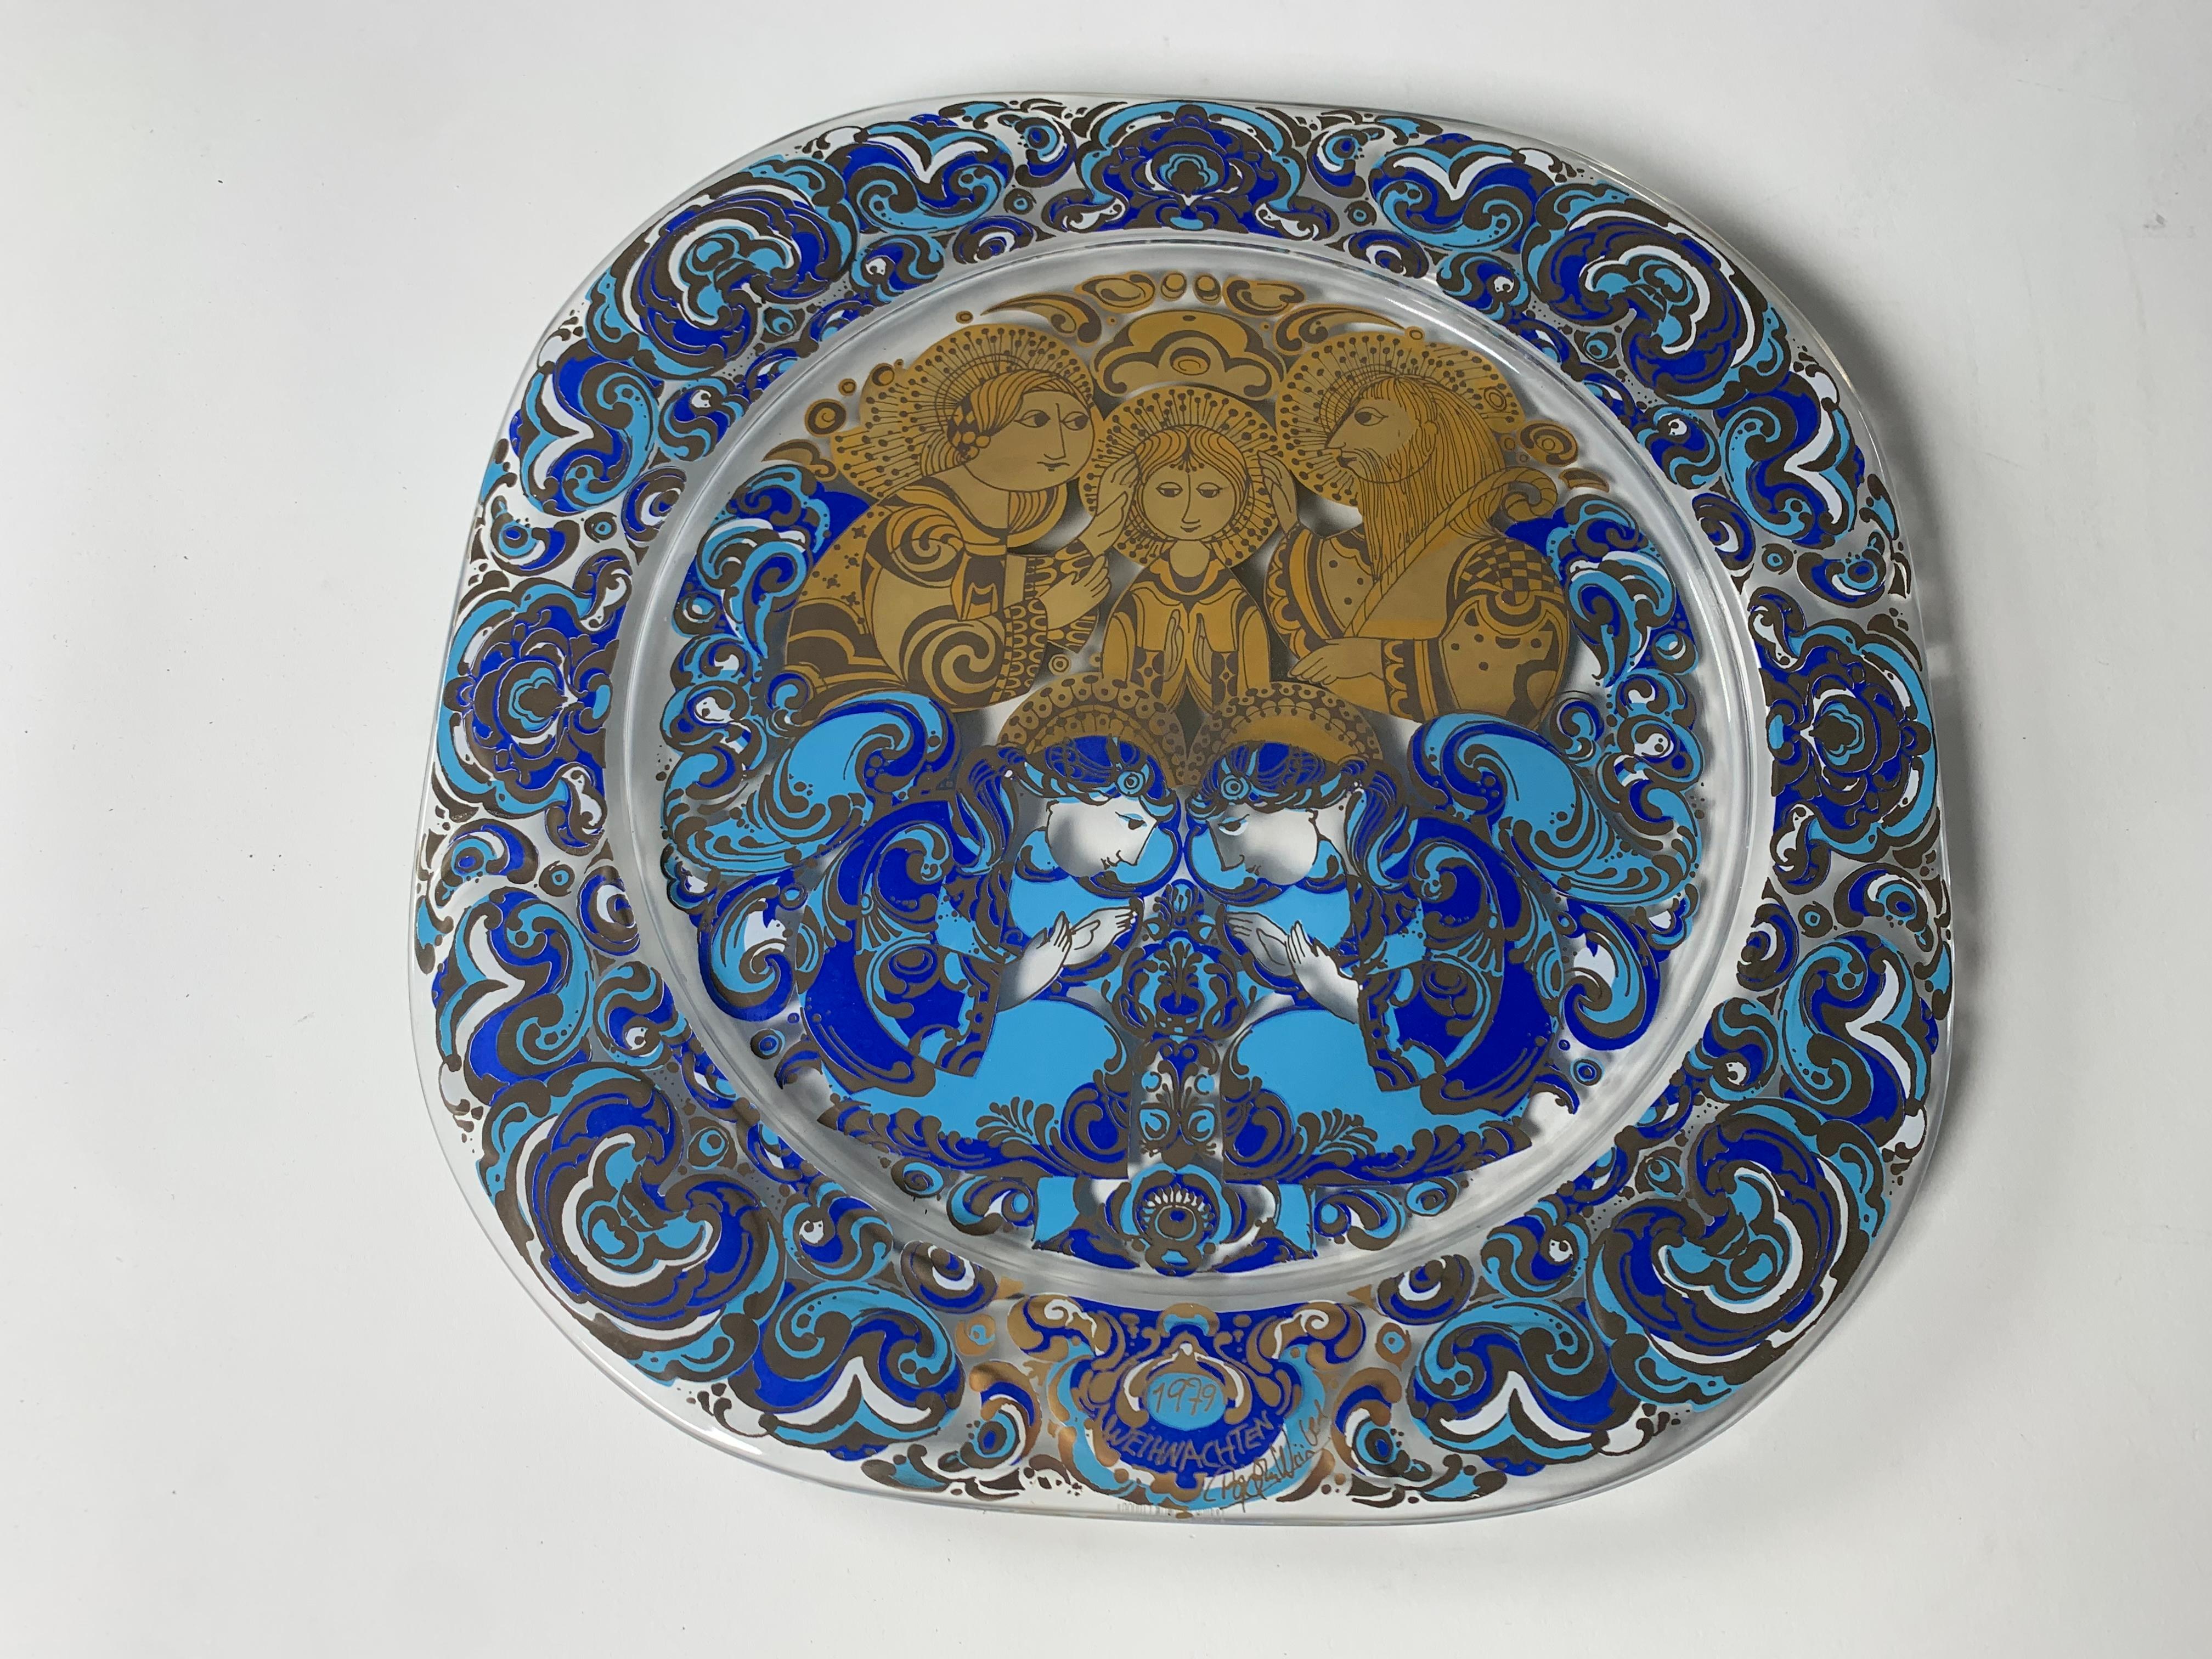 Bjorn Wiinblad for Rosenthal Hand-decorated glass plates in bright colors. With Wiinblad's distinctive look, these plates are as much a decorative piece as they are a festive piece; the colors are exquisite and the classic Wiinblad look. Equipped